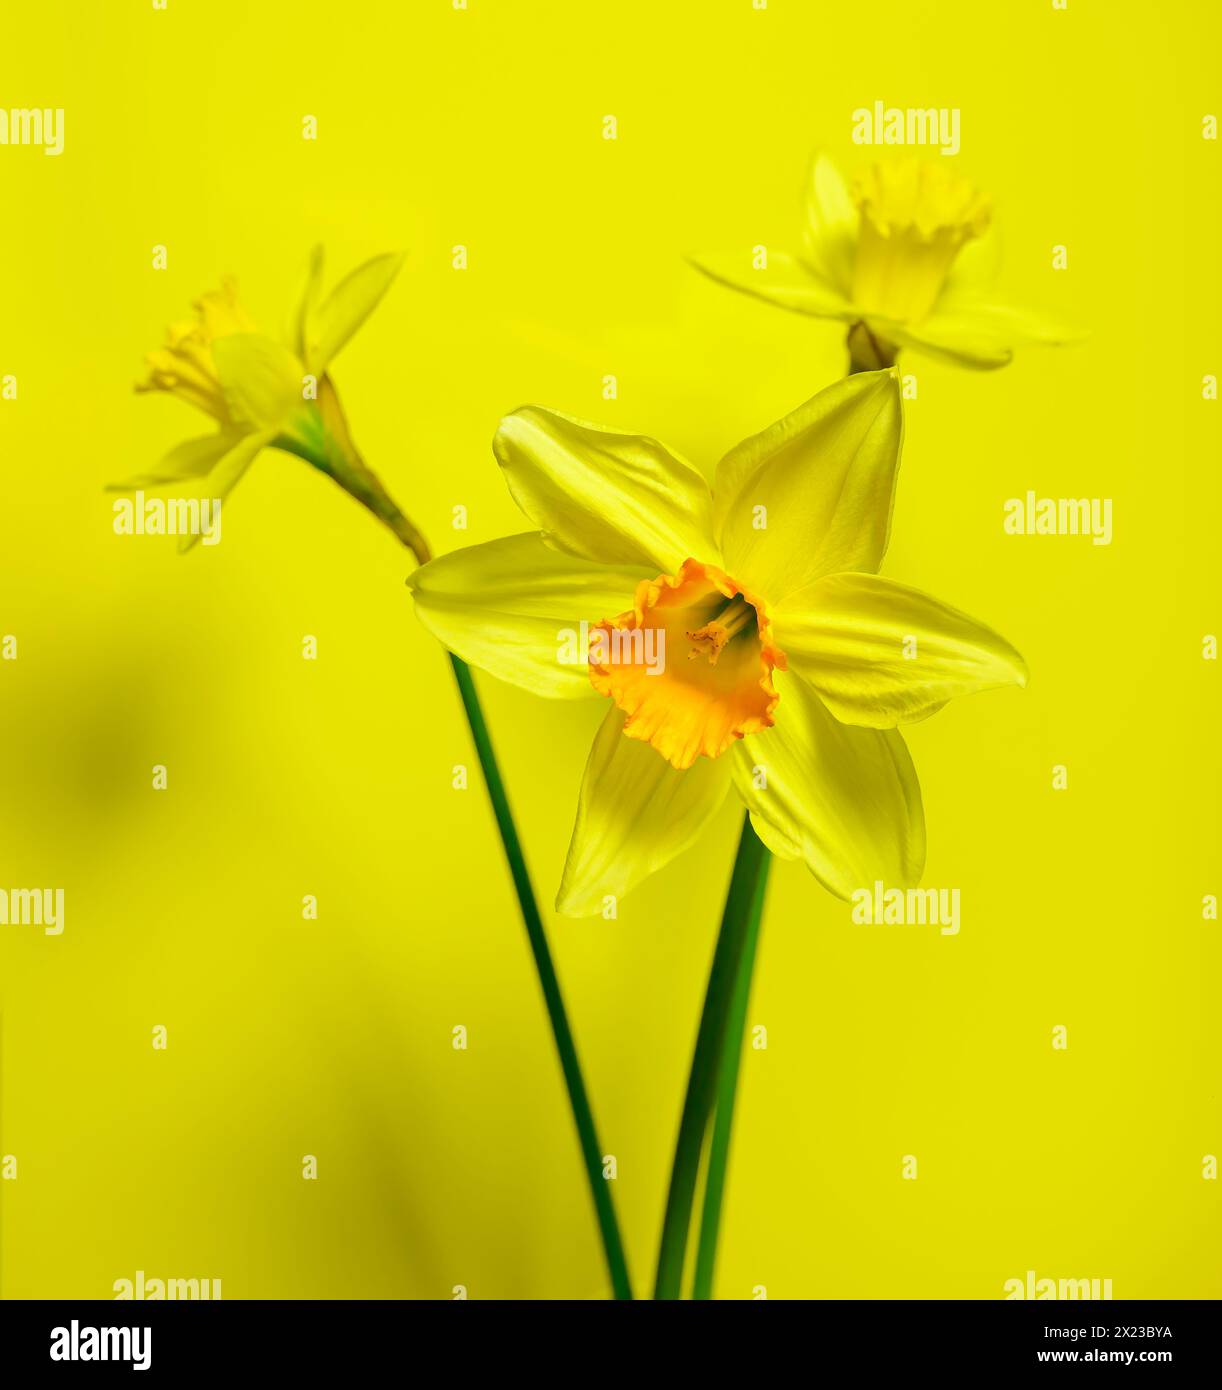 Three Daffodils photographed against a yellow background Stock Photo